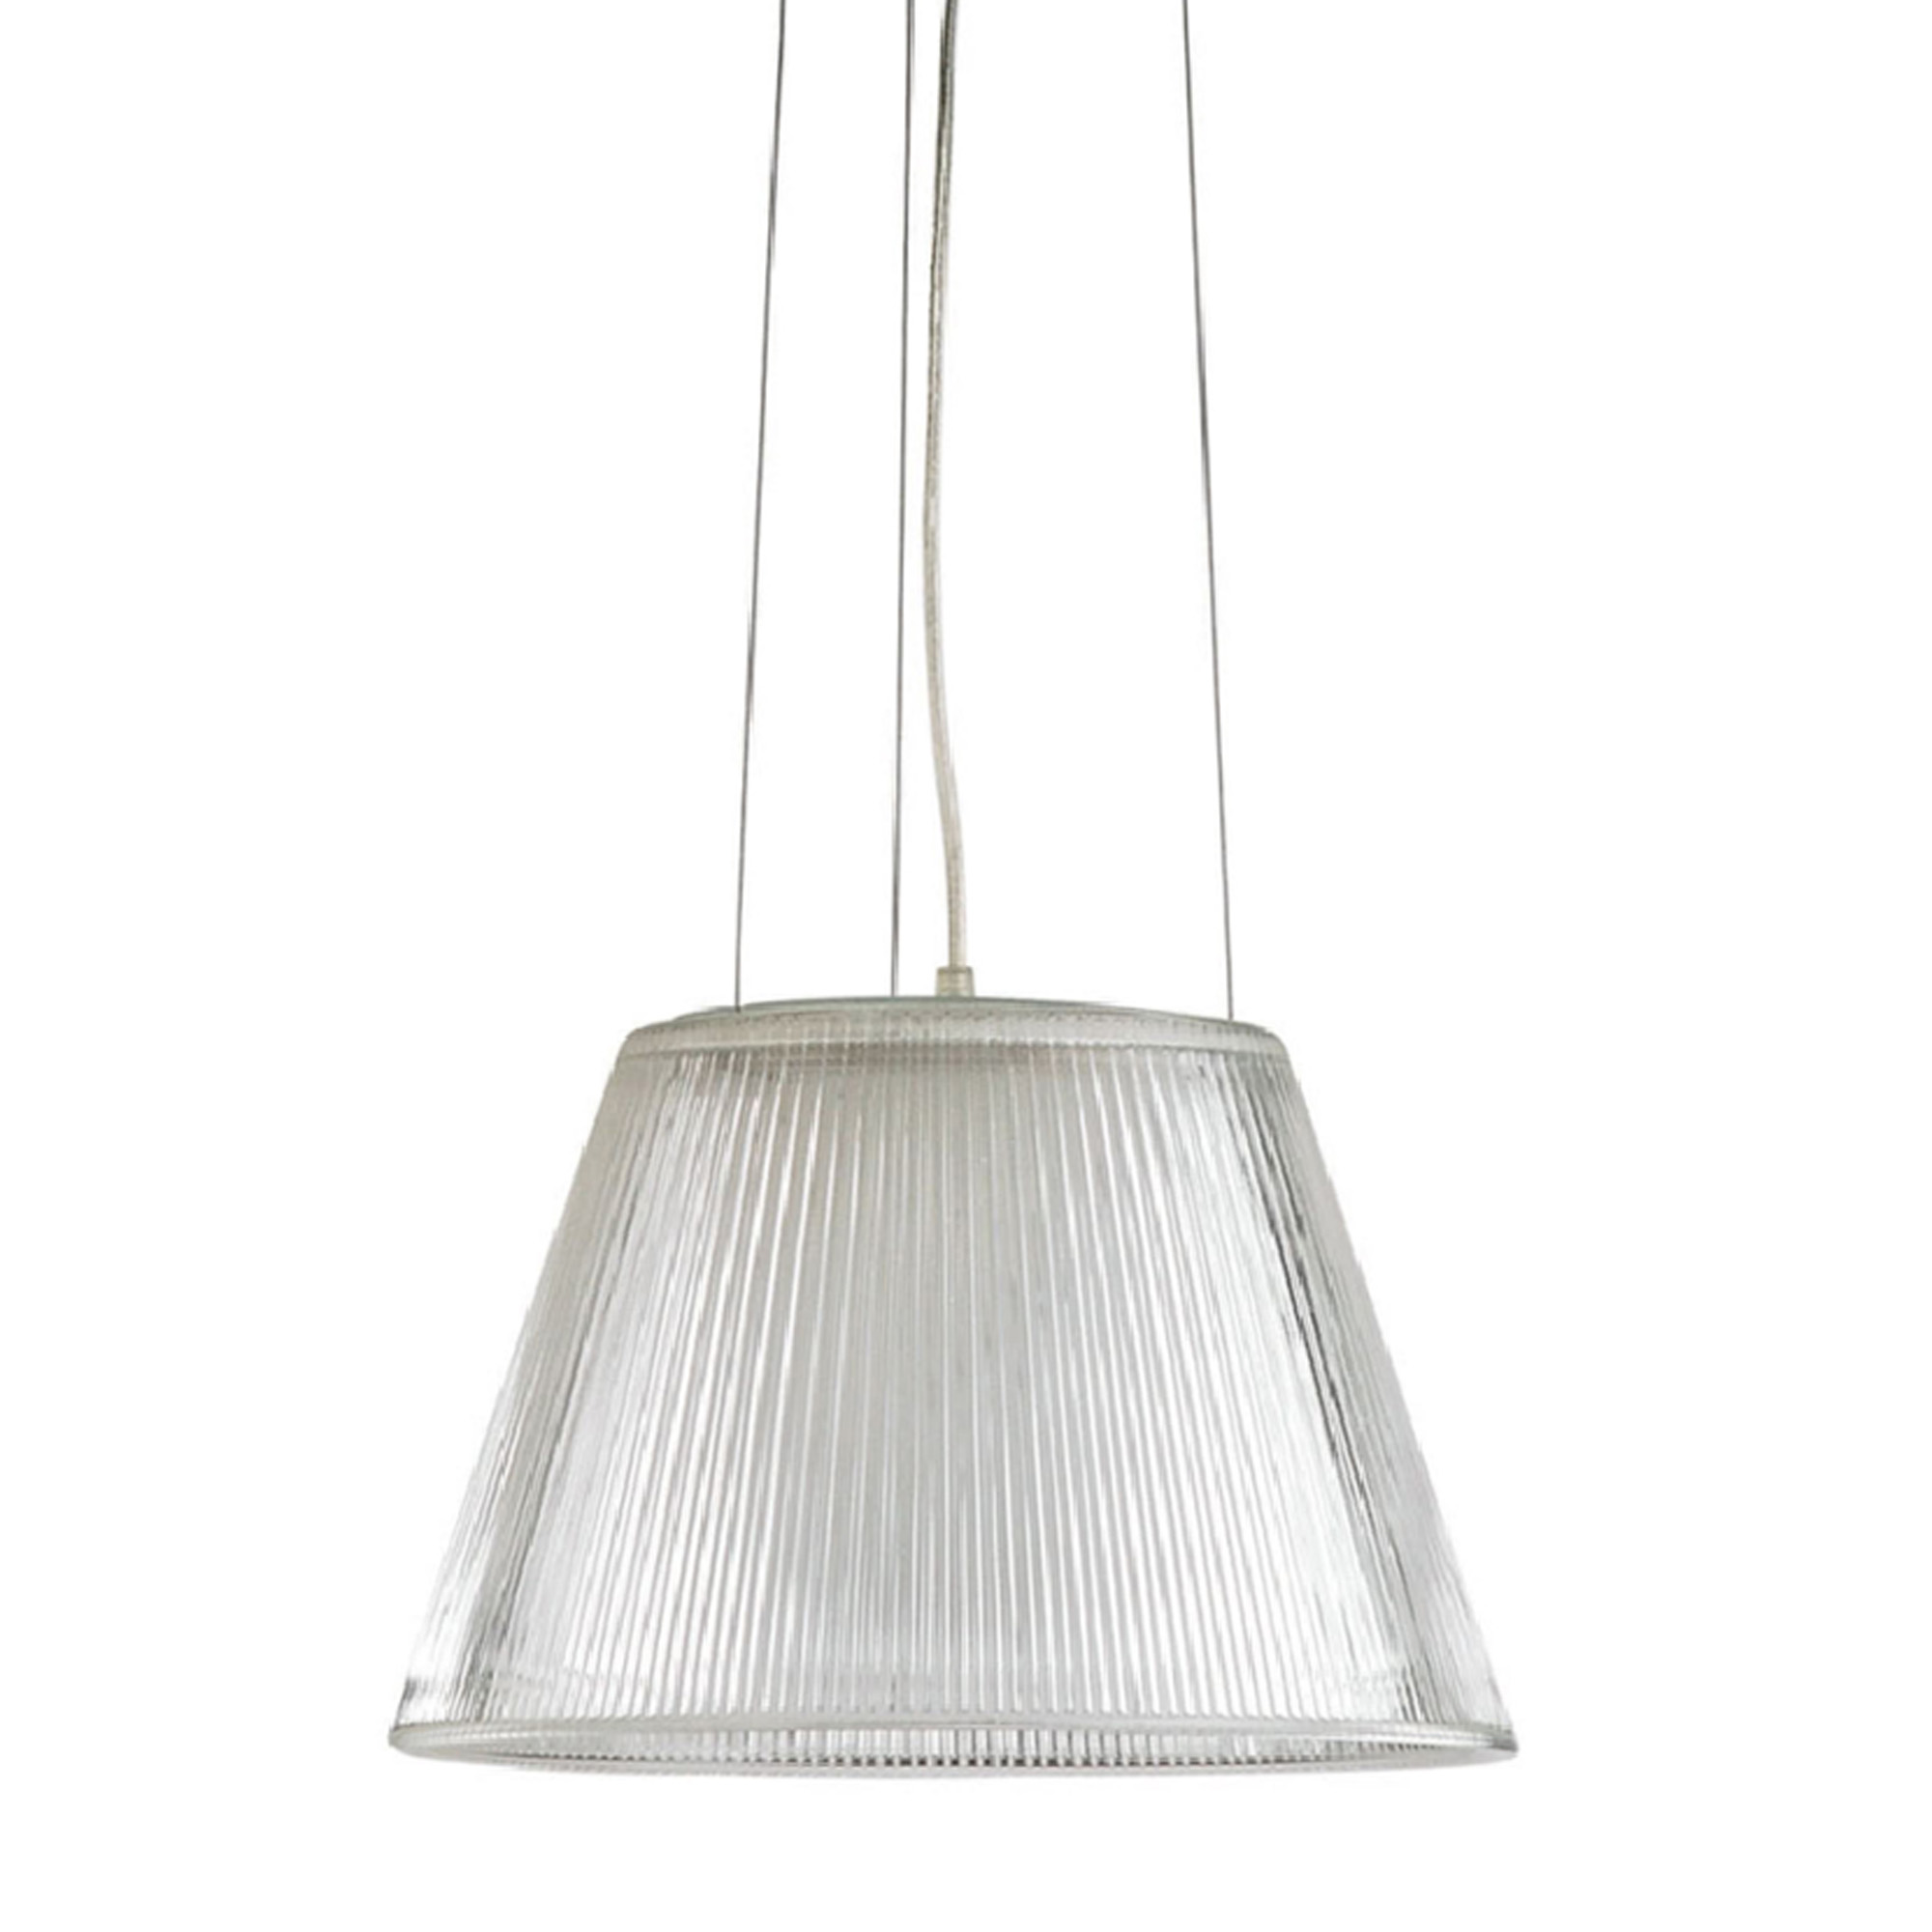 Fashionable  pendant lamp DP172-1.Fashionable  pendant lamp DP172            2.Attractive design         3.Competitive price         4.OEM are welcome ,size and colour also can be changed as clients requirement